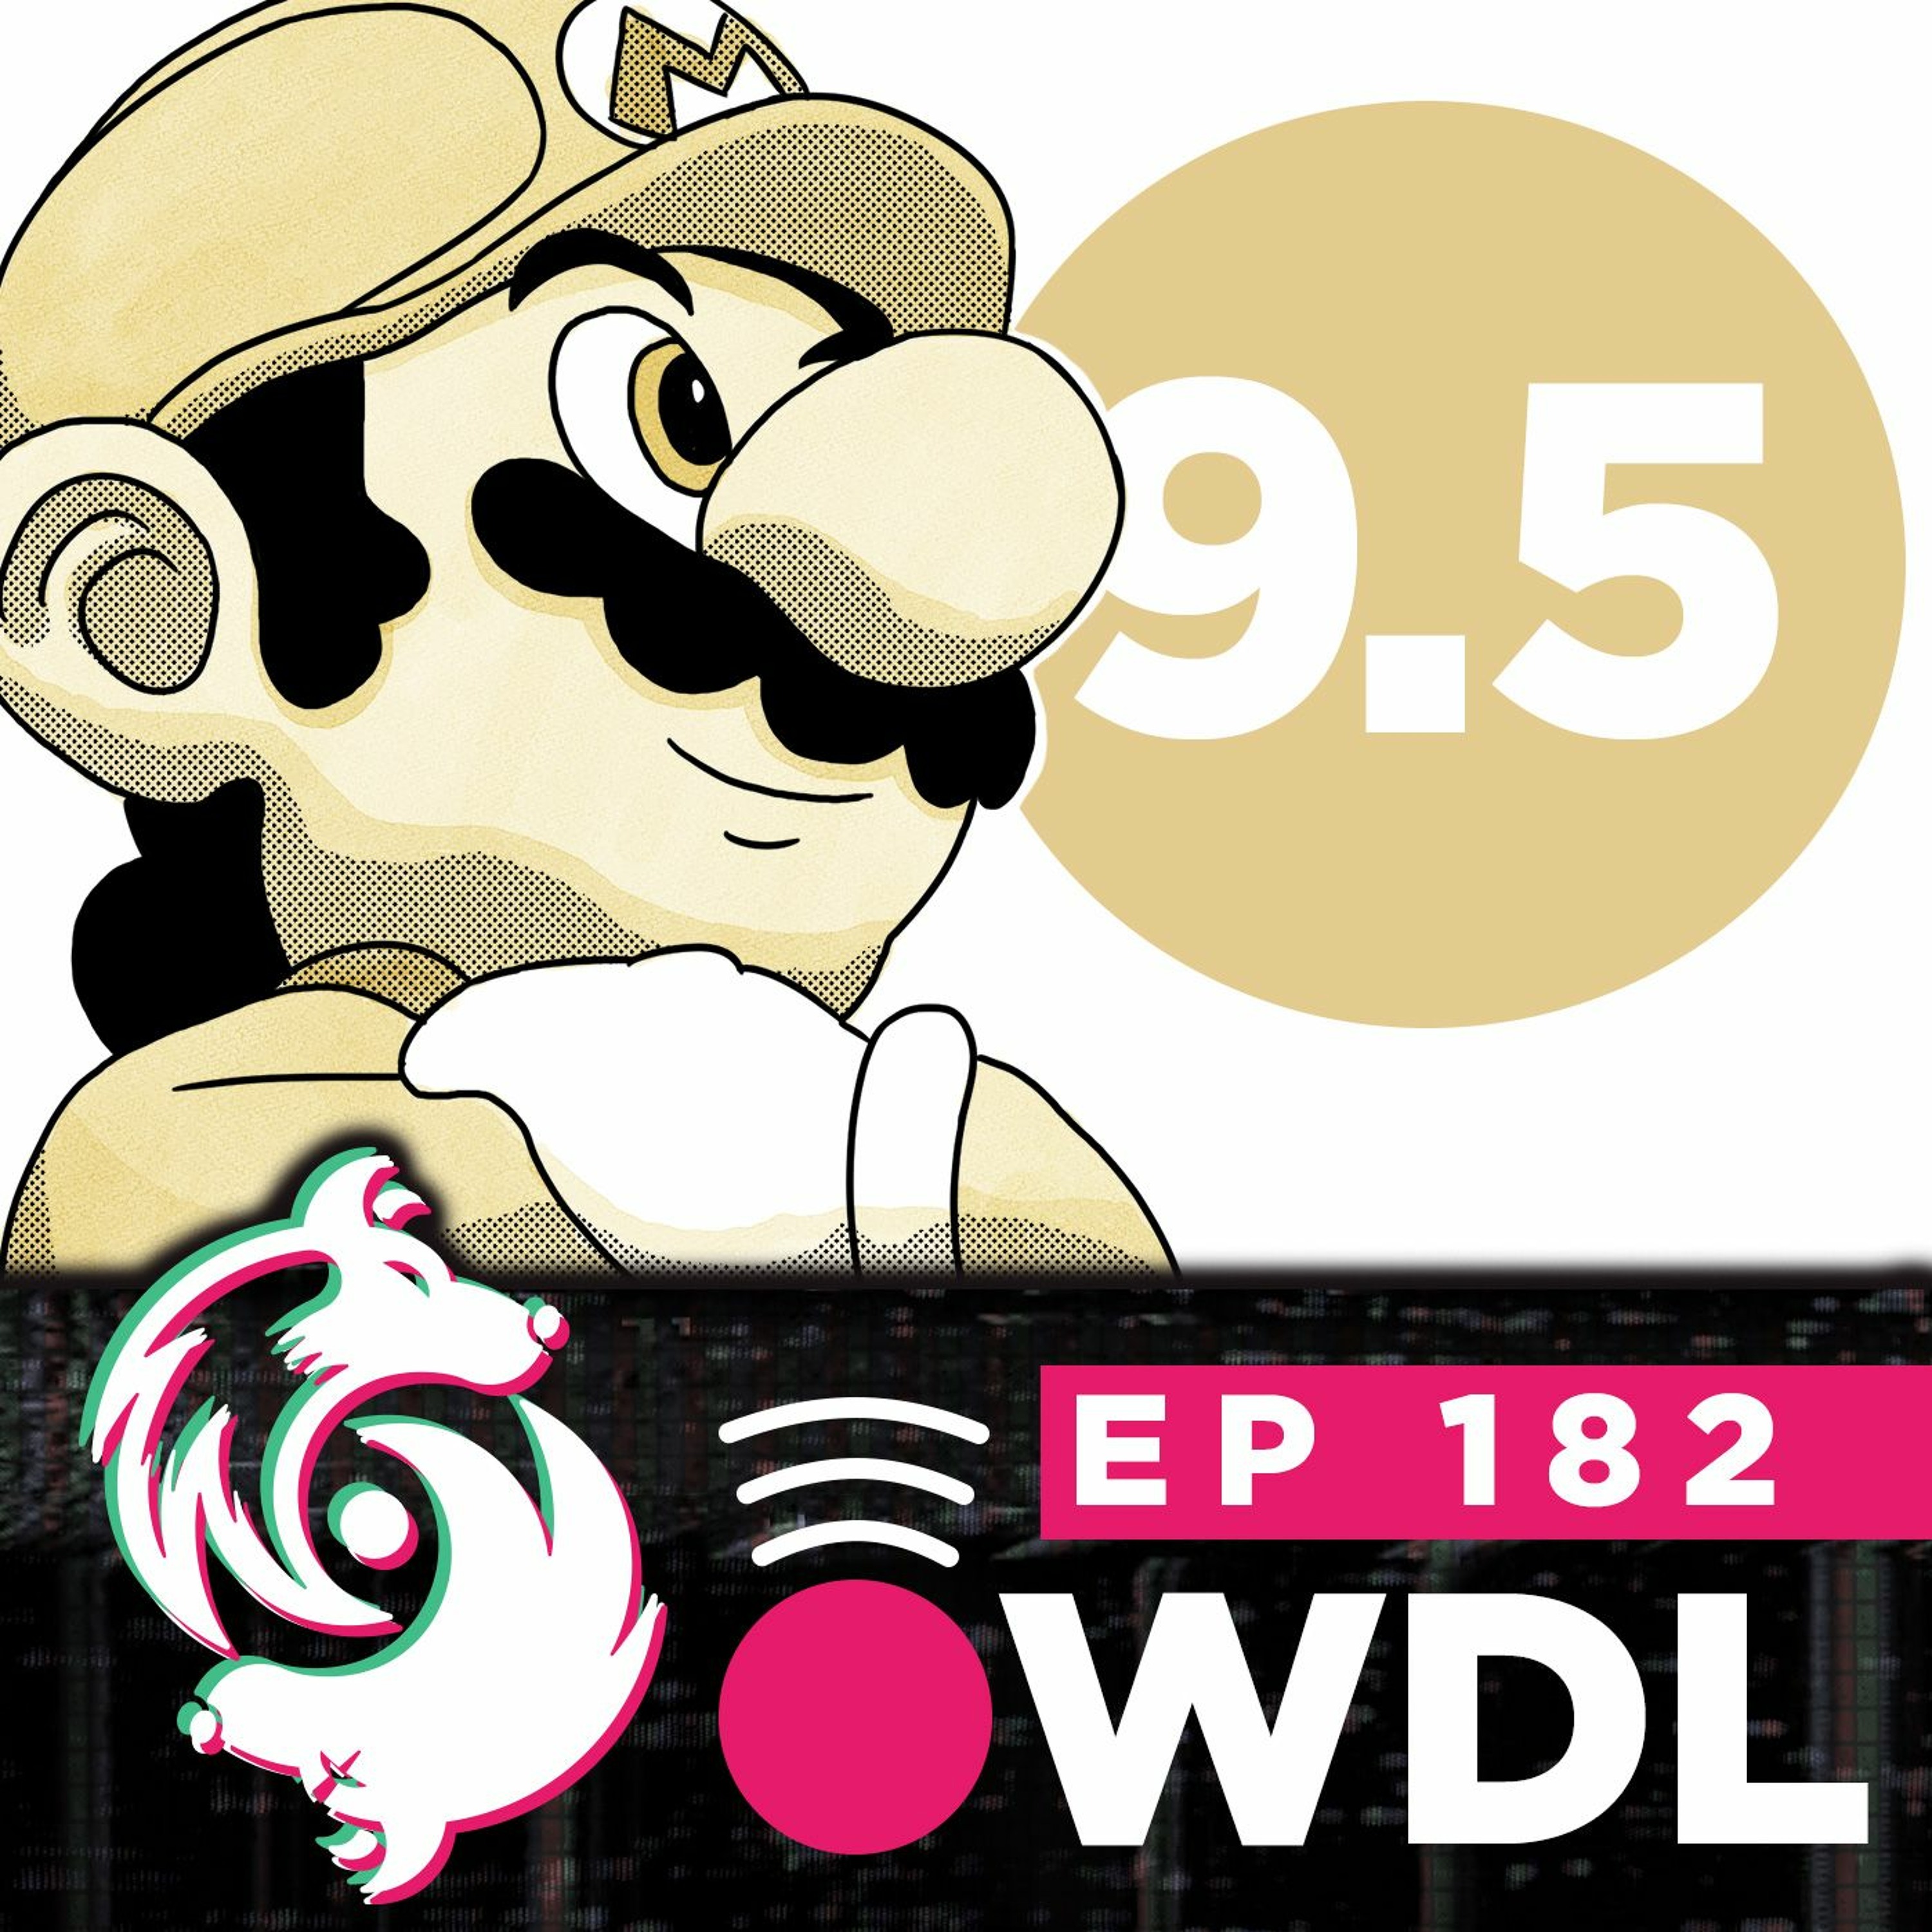 The Super Mario Maker 2 reviews are in - WDL Ep 182